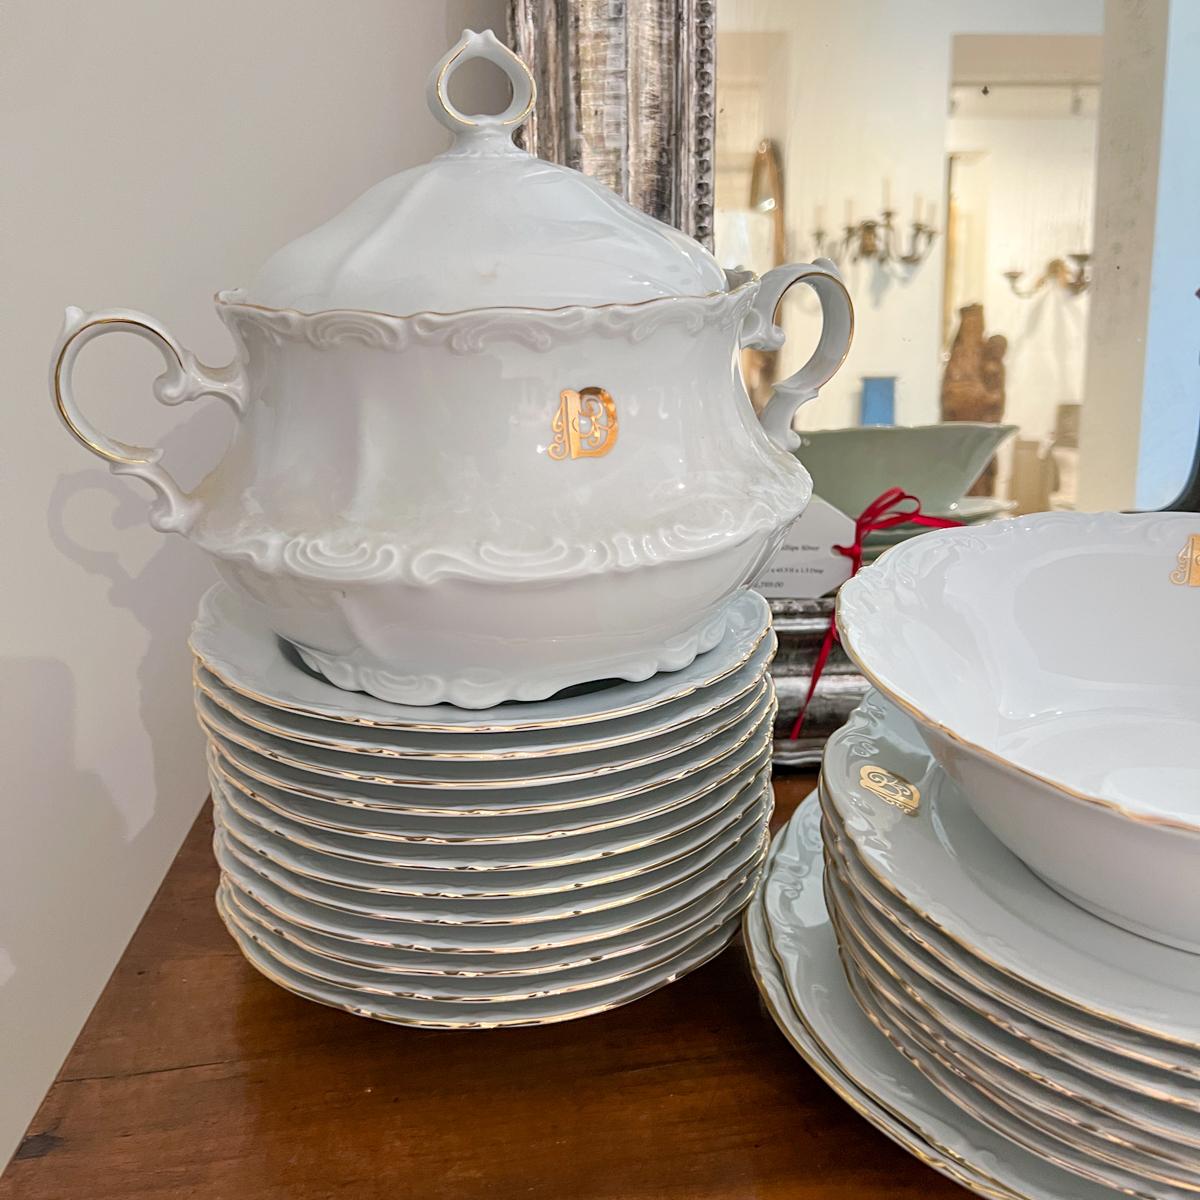 42 piece set of white china with elaborate “D” monogram on each piece. The mark is Mitterteich Bavaria W. Germany. A variety of plates, serving pieces and a large lidded Terrine.